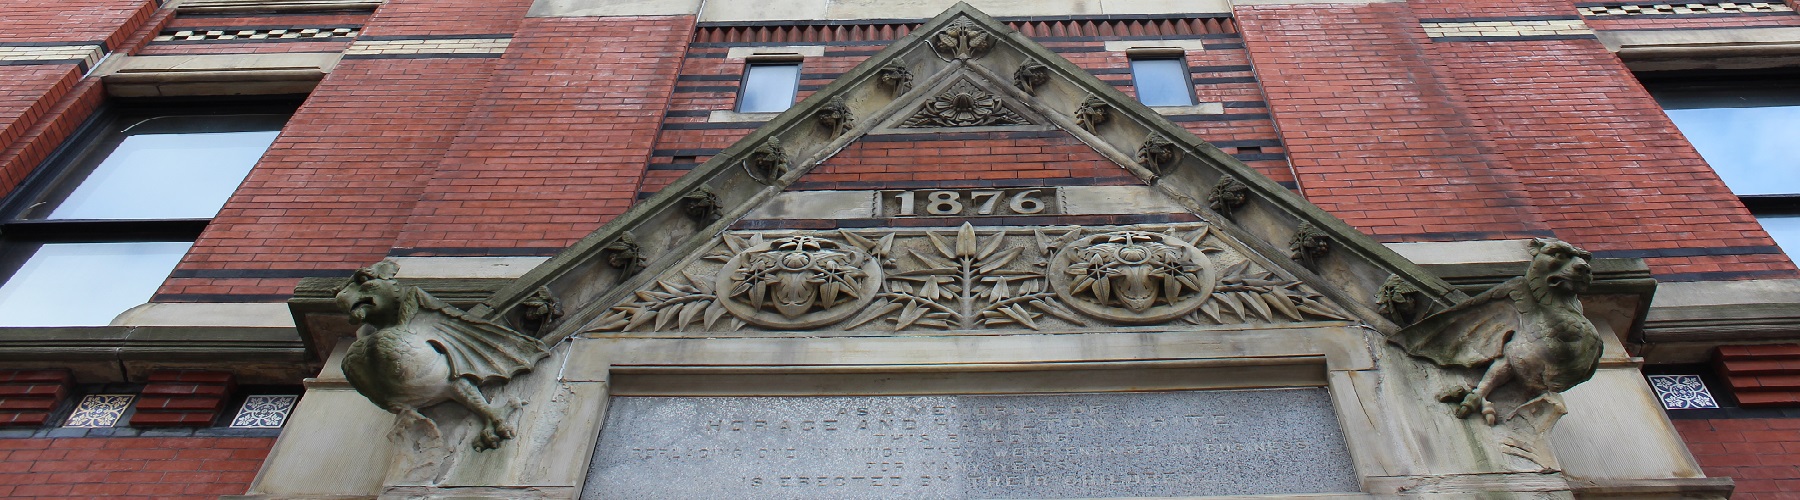 Building front with 1876 in the stonework